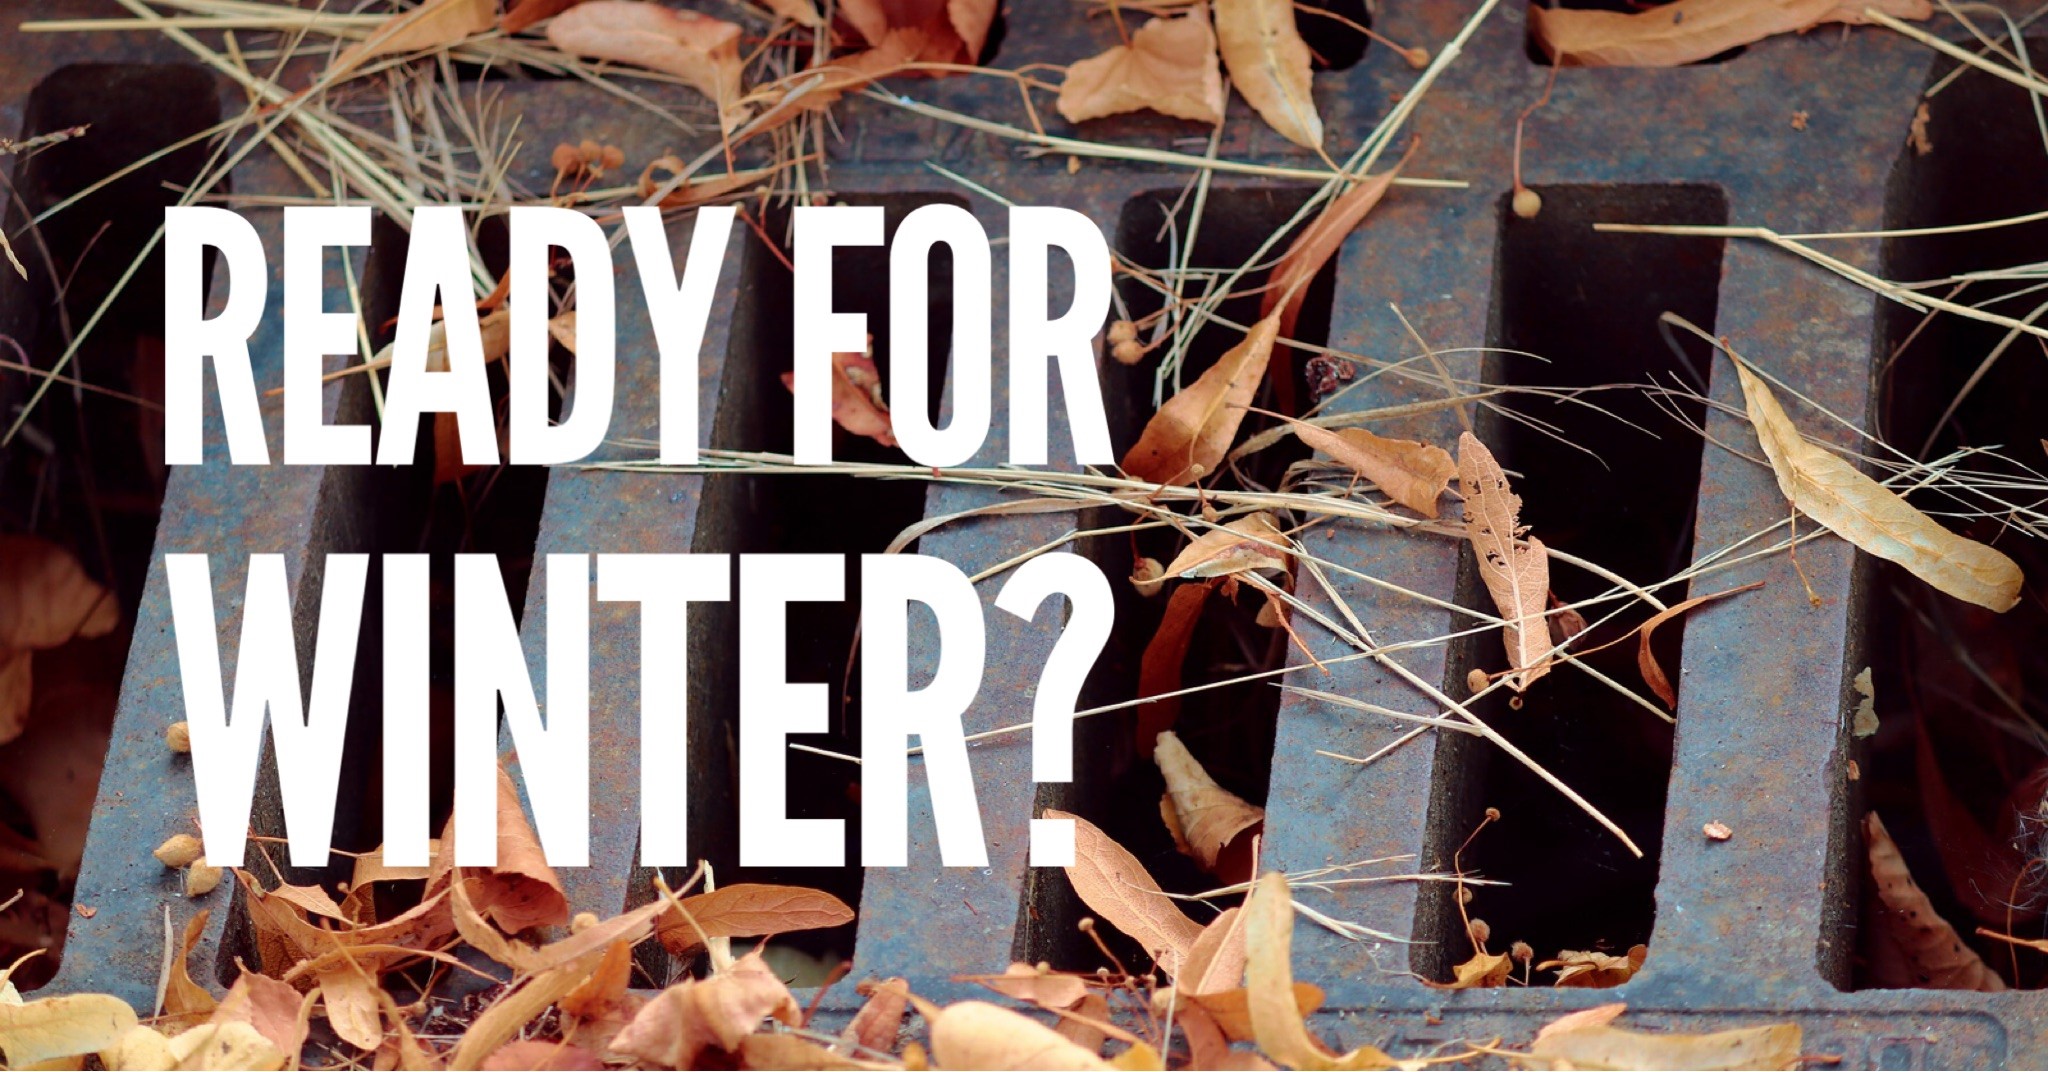 Are your drains ready for winter?